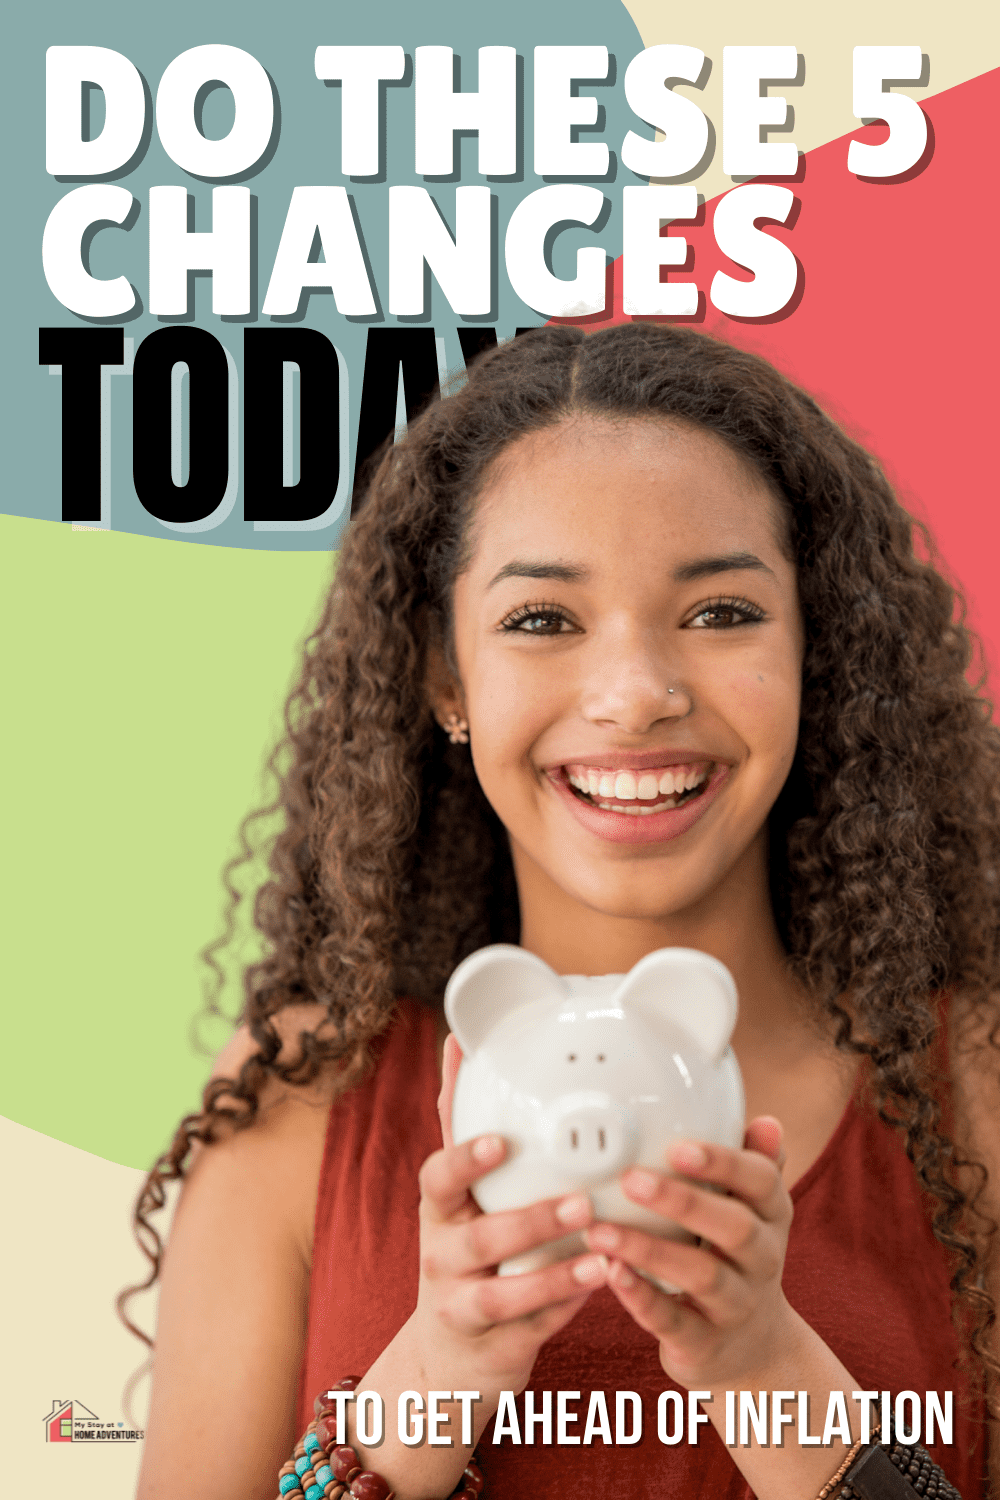 Learn five changes that my family is making due to inflation. These changes will make you think about adjusting your finances in the face of rising prices. via @mystayathome